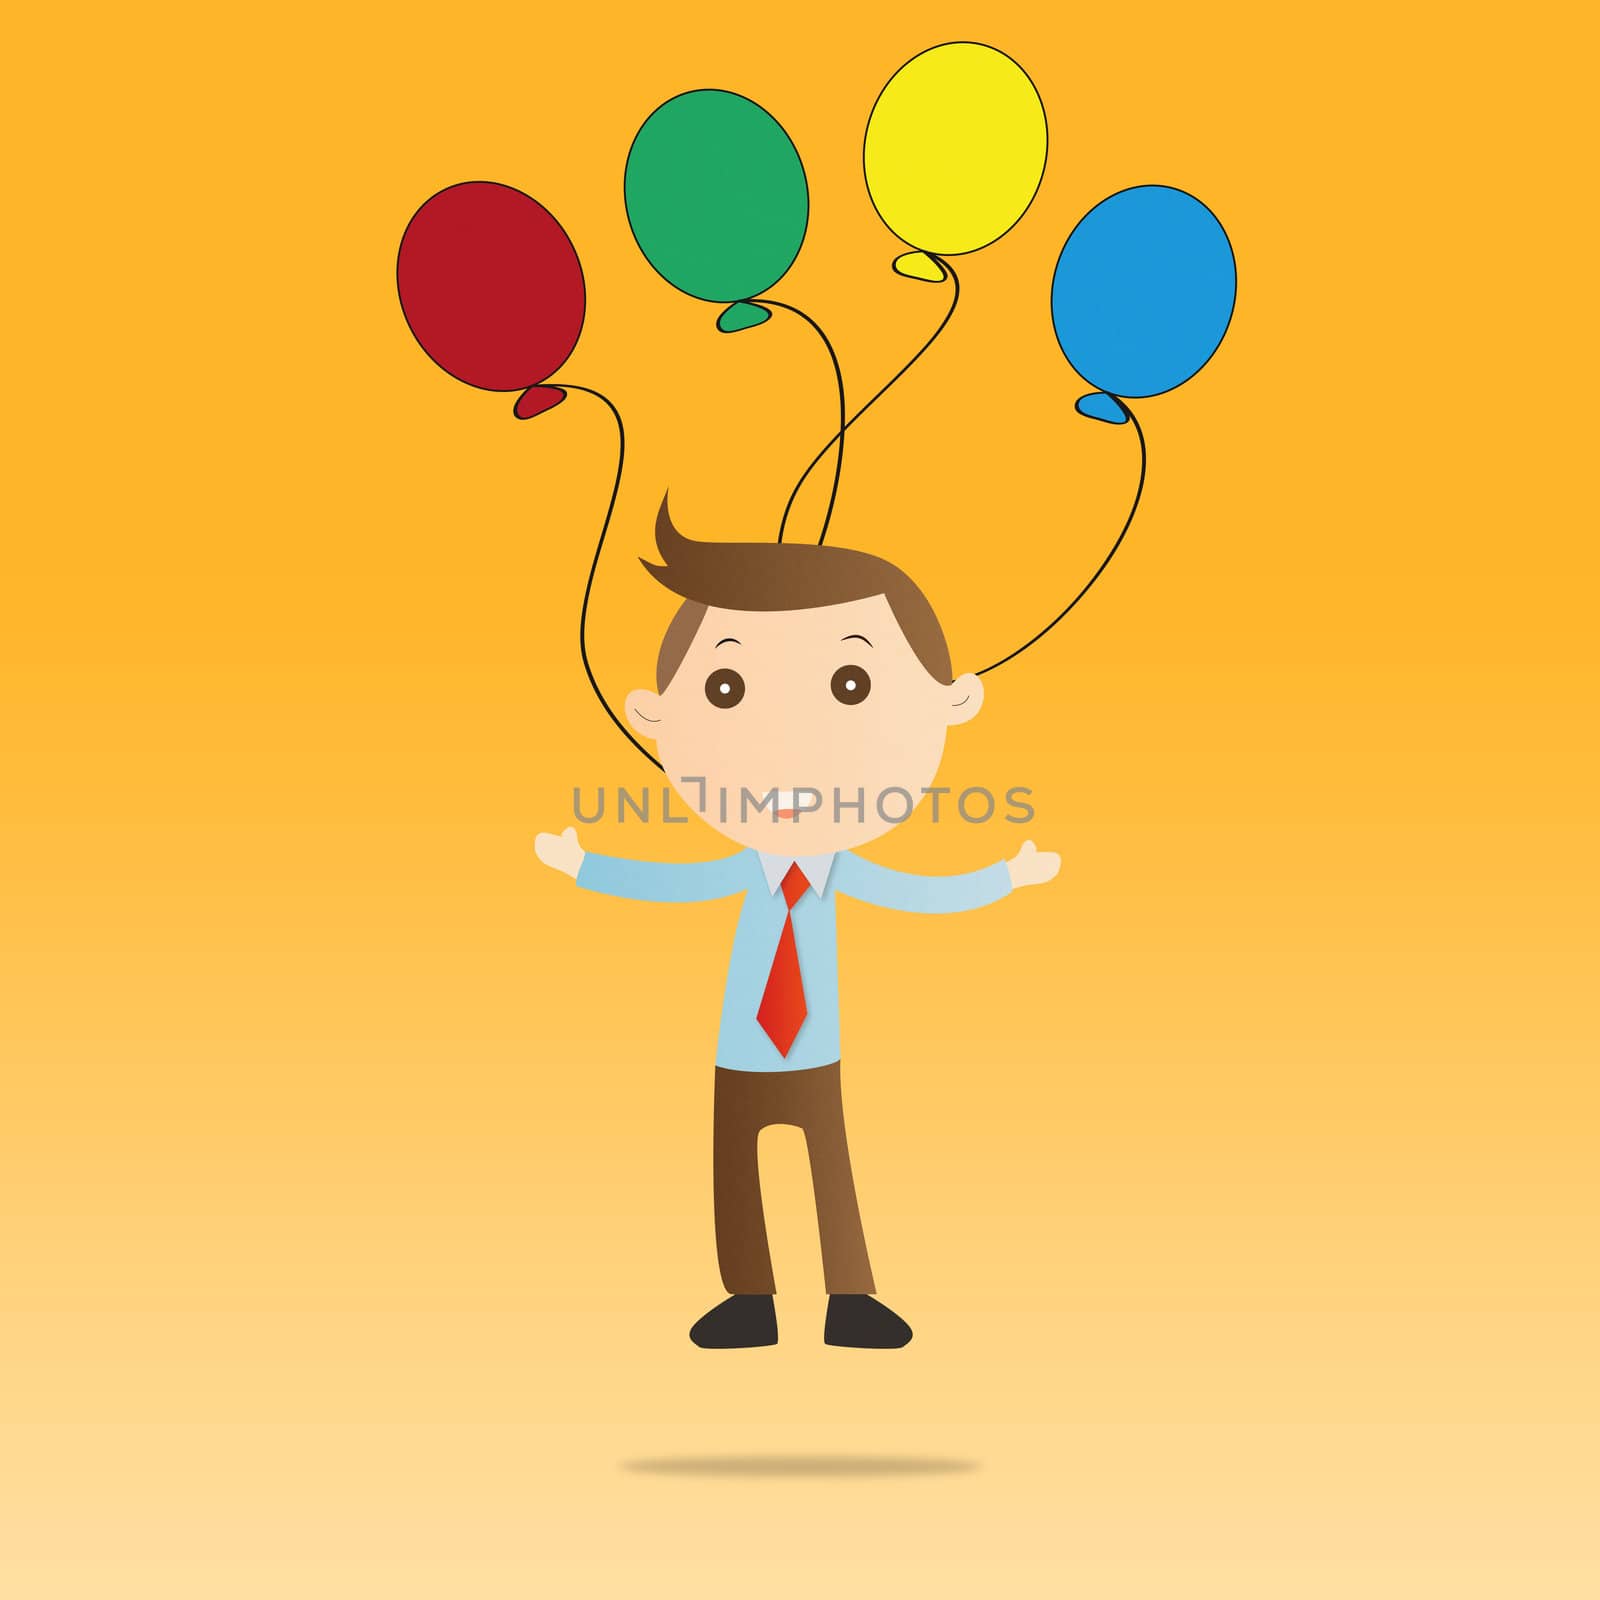 Businessman with balloon on yellow background